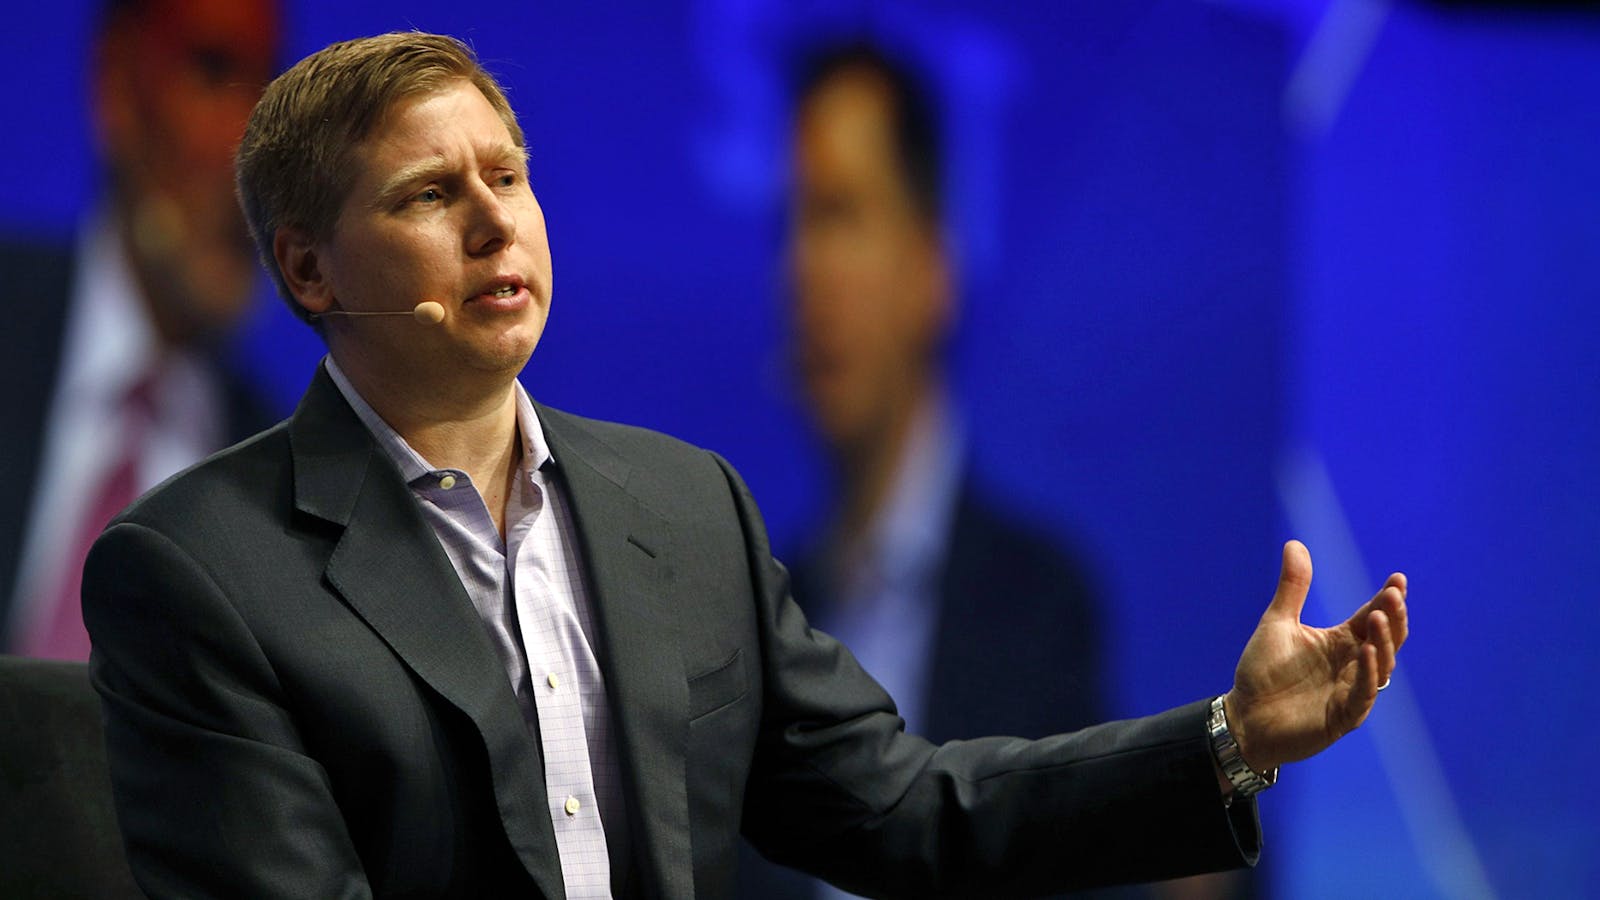 DCG's CEO, Barry Silbert. Photo by Bloomberg.